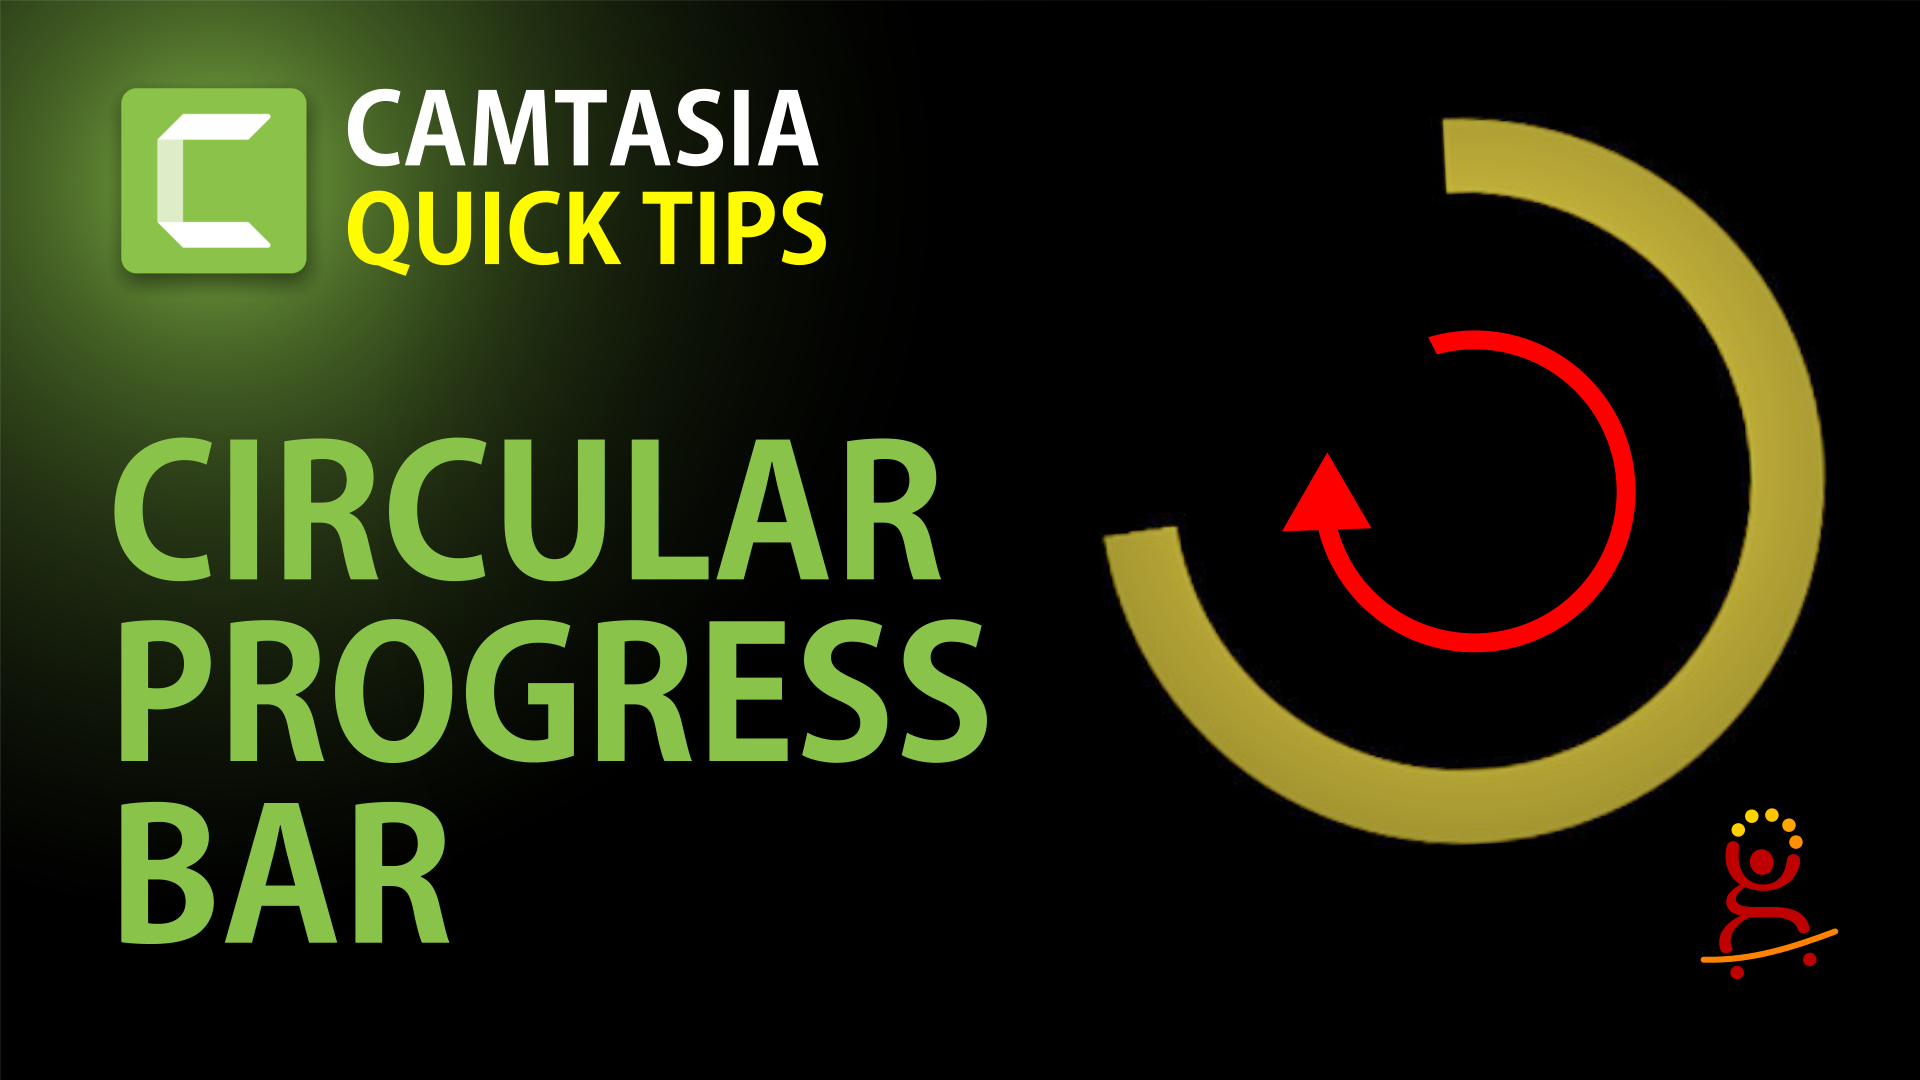 How to make a circle progress bar animation in Camtasia 2020